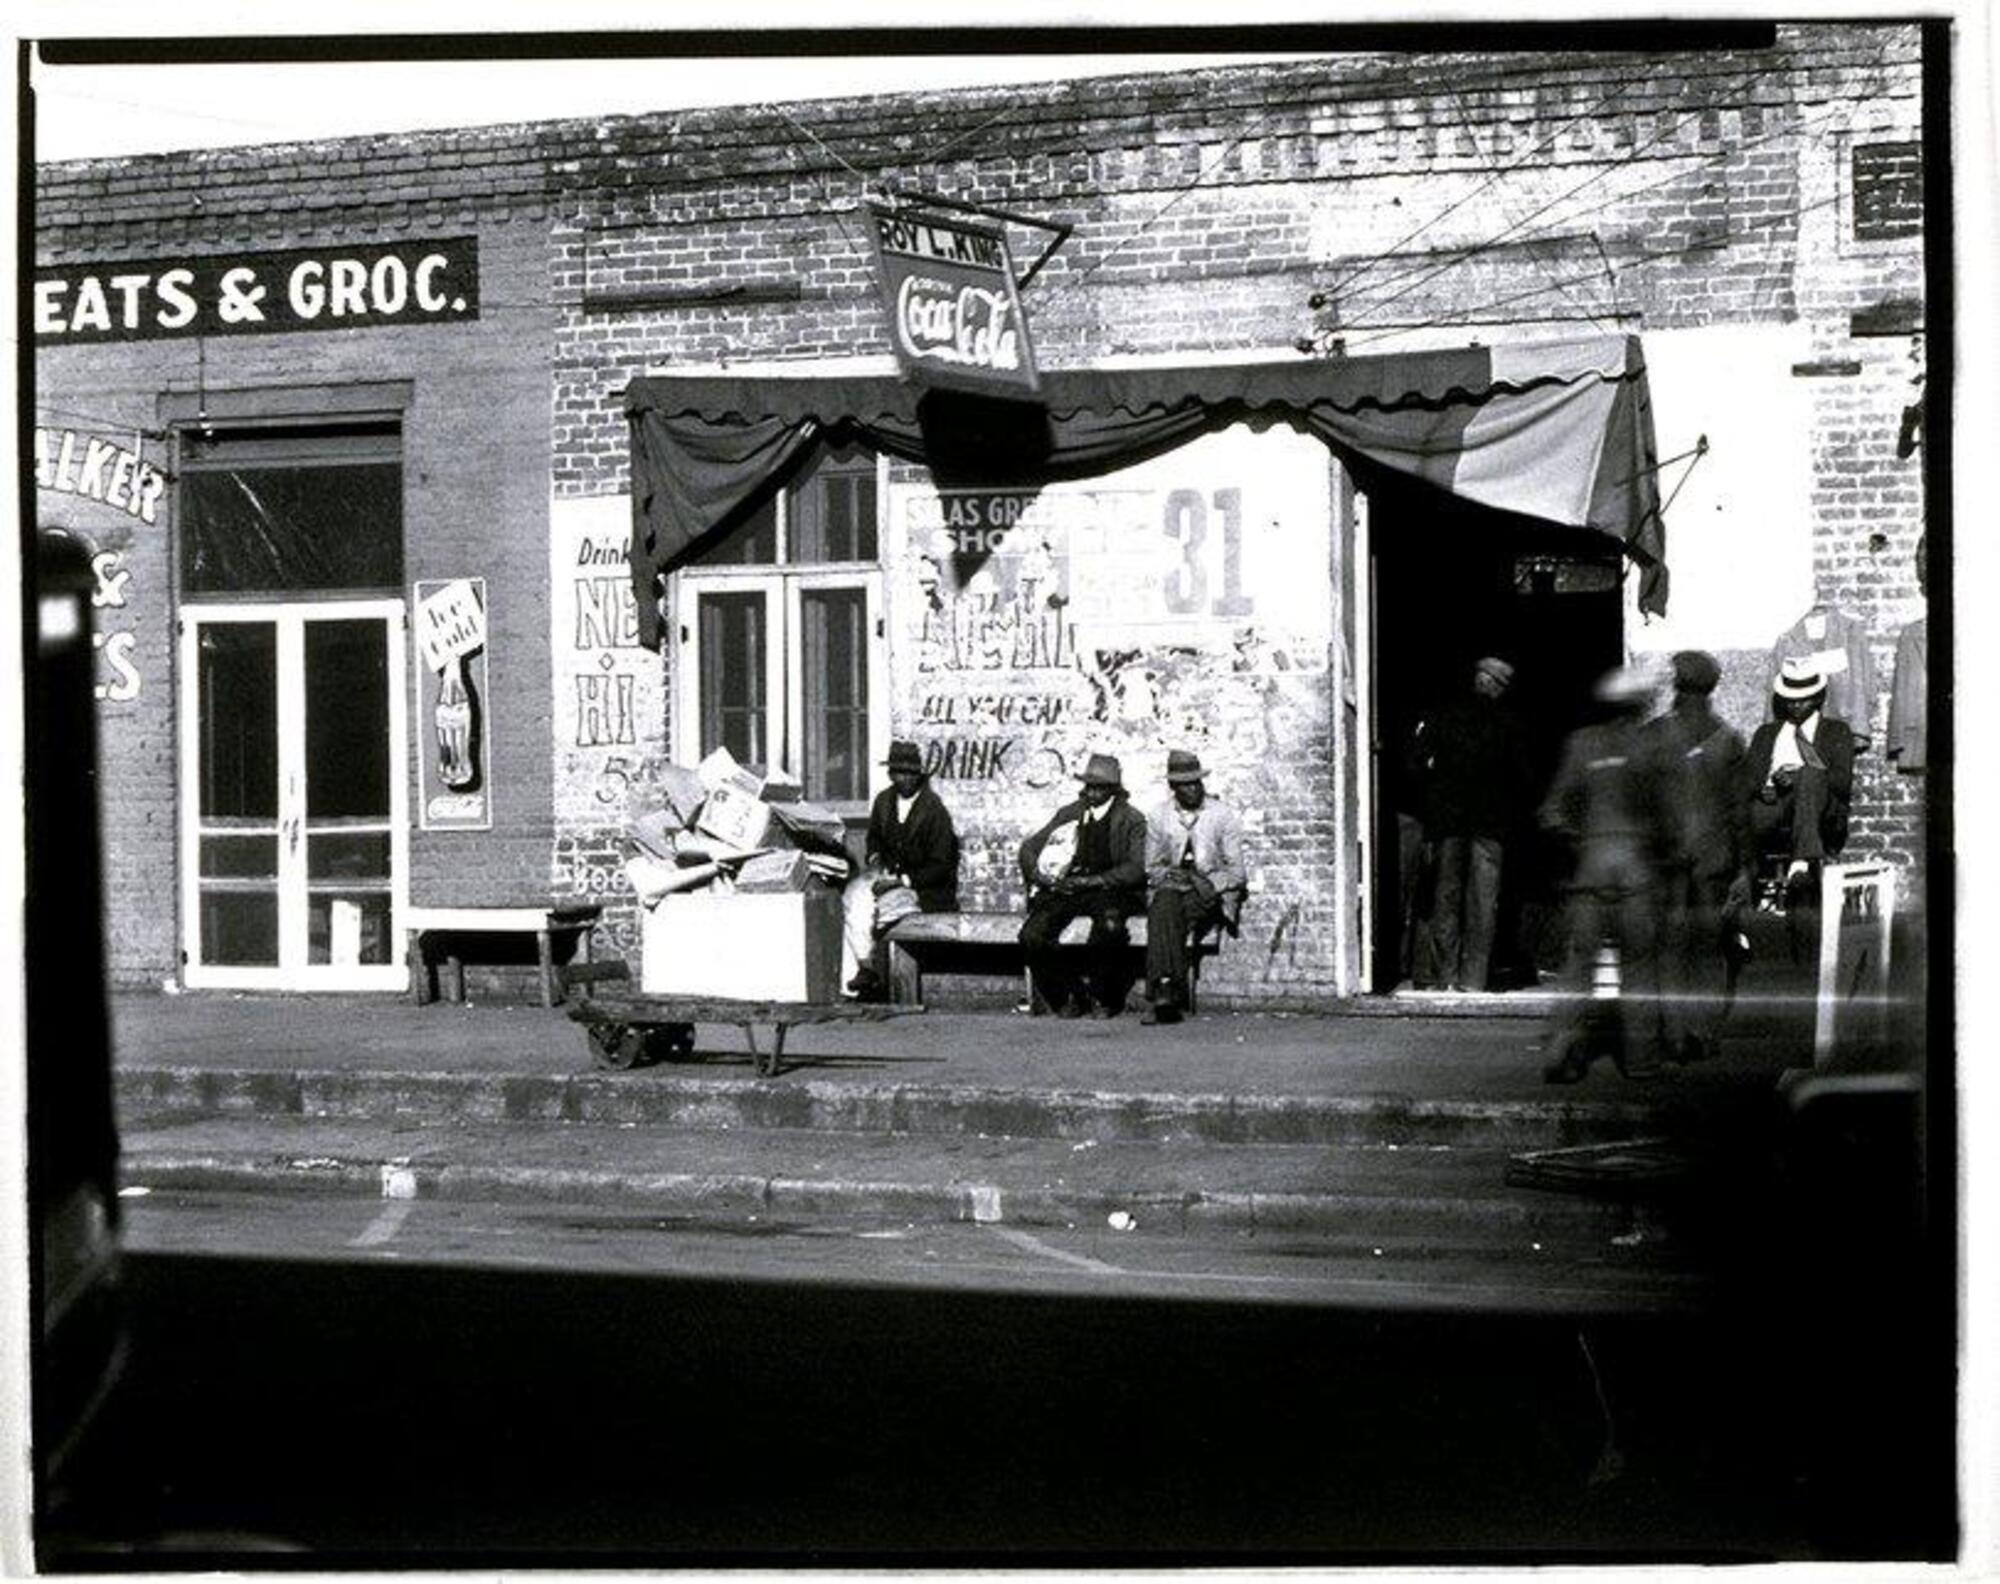 View of a storefront with people sitting in front on benches and entering the shop through a doorway.